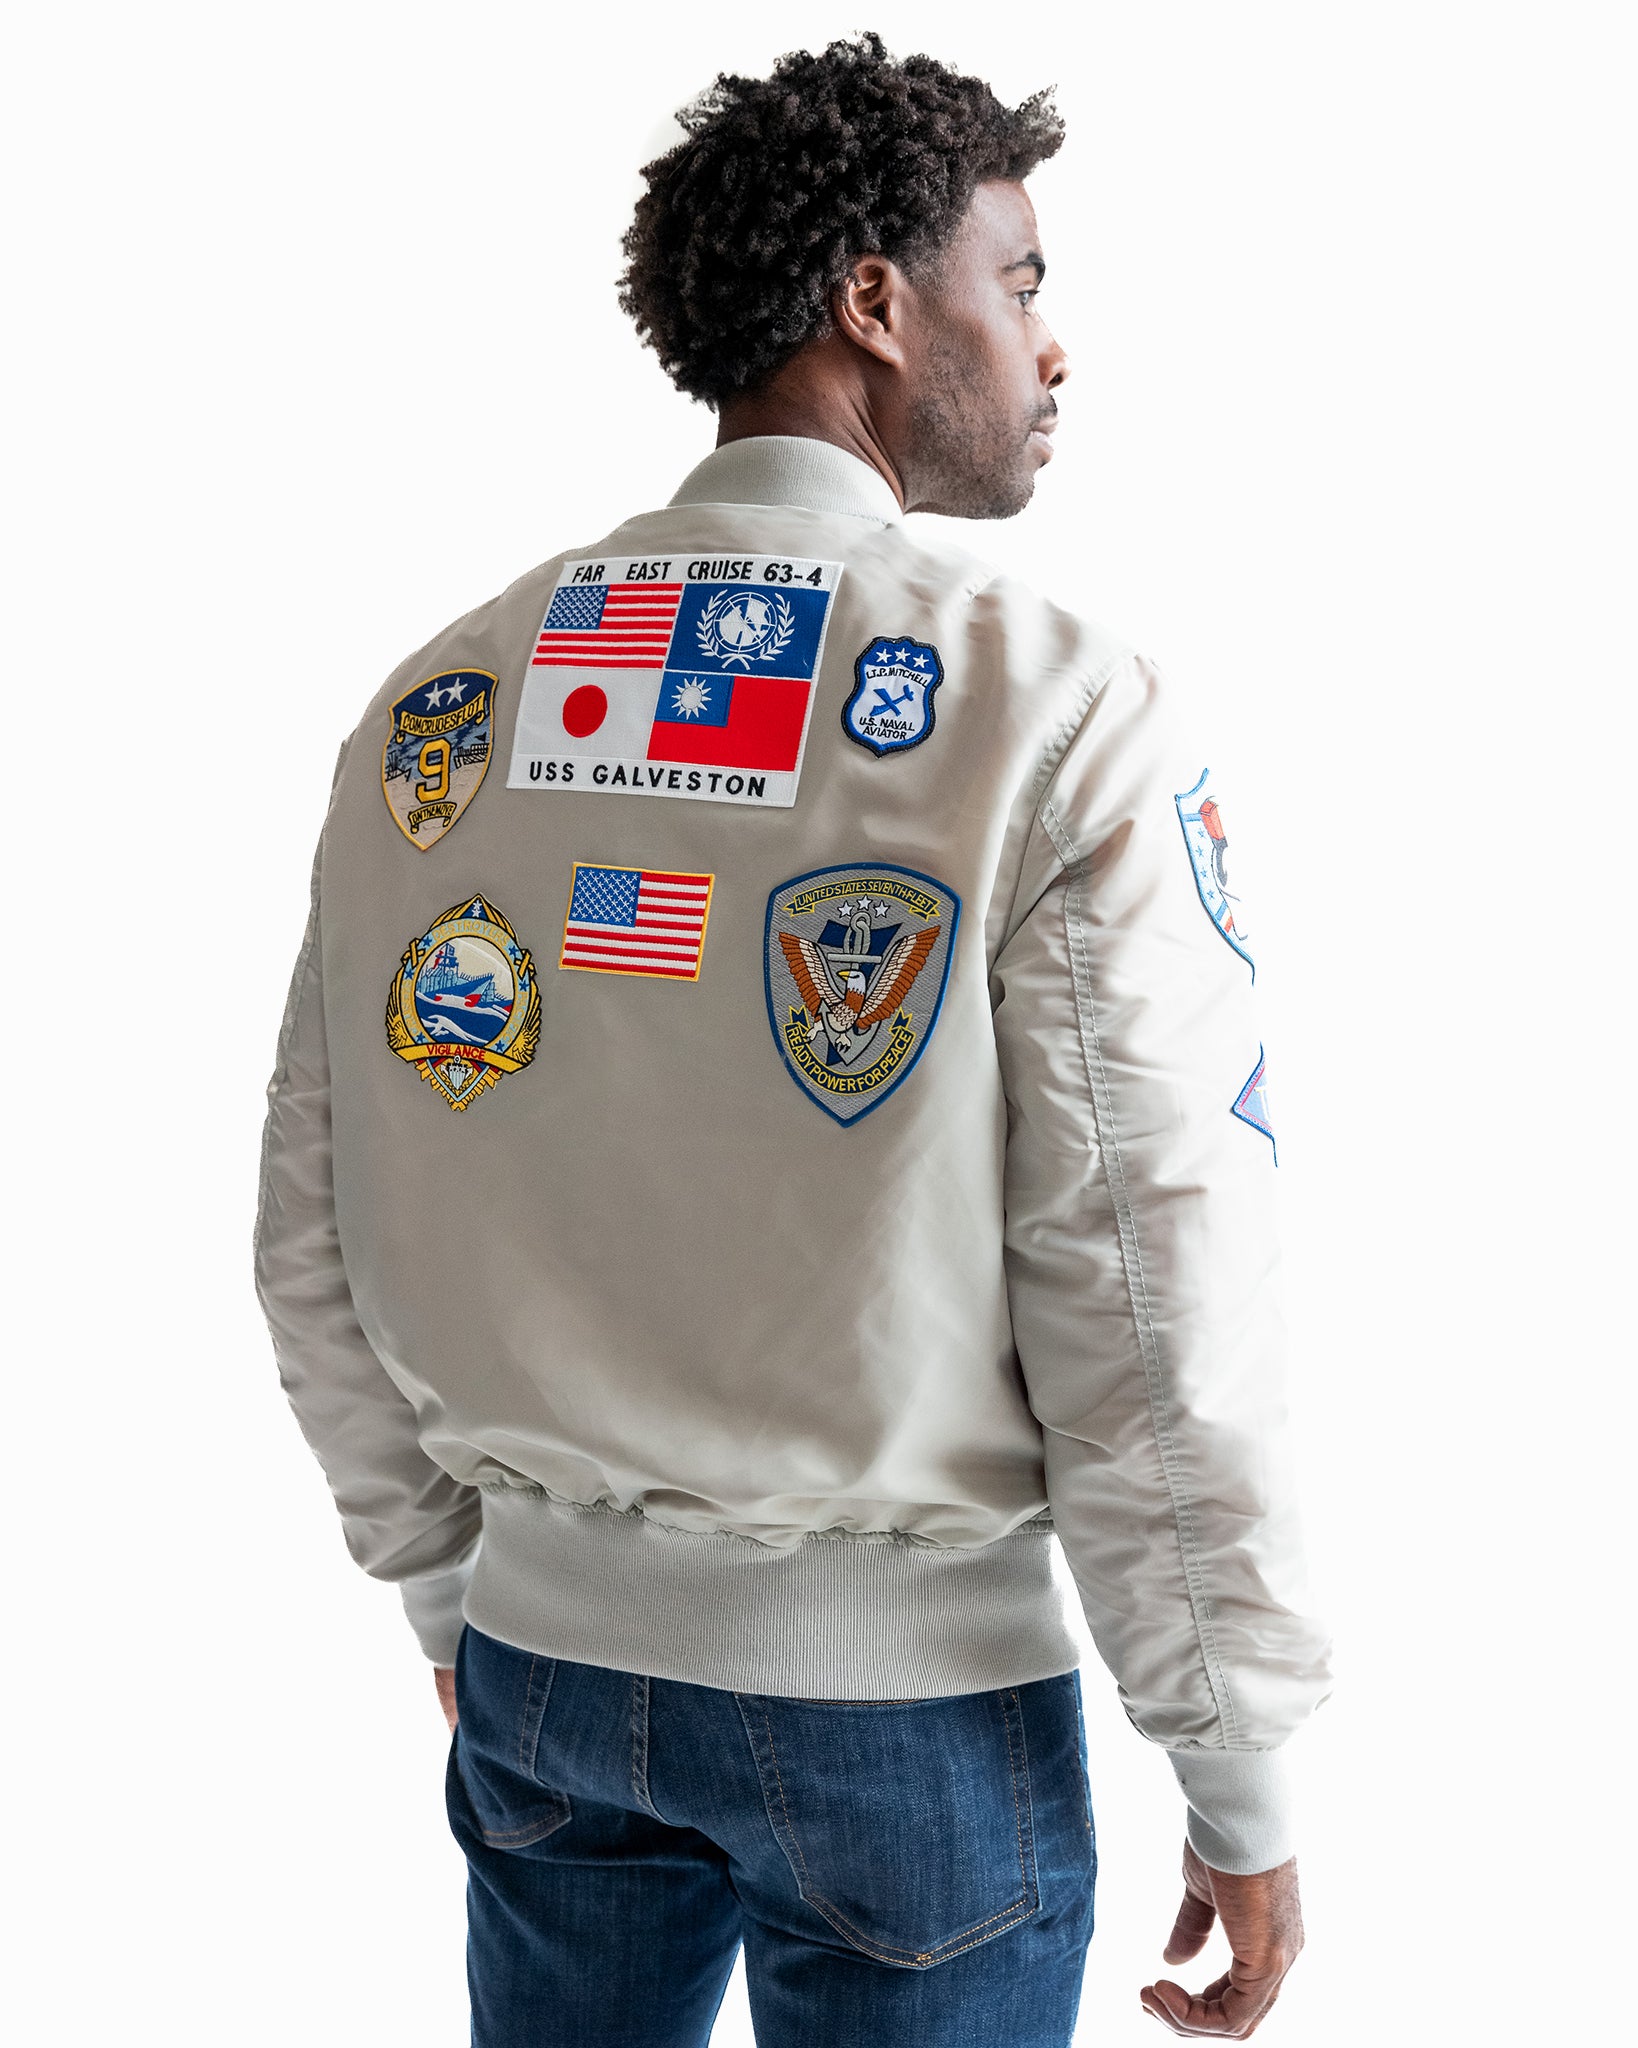 Denim Jacket With Patches - VisualHunt